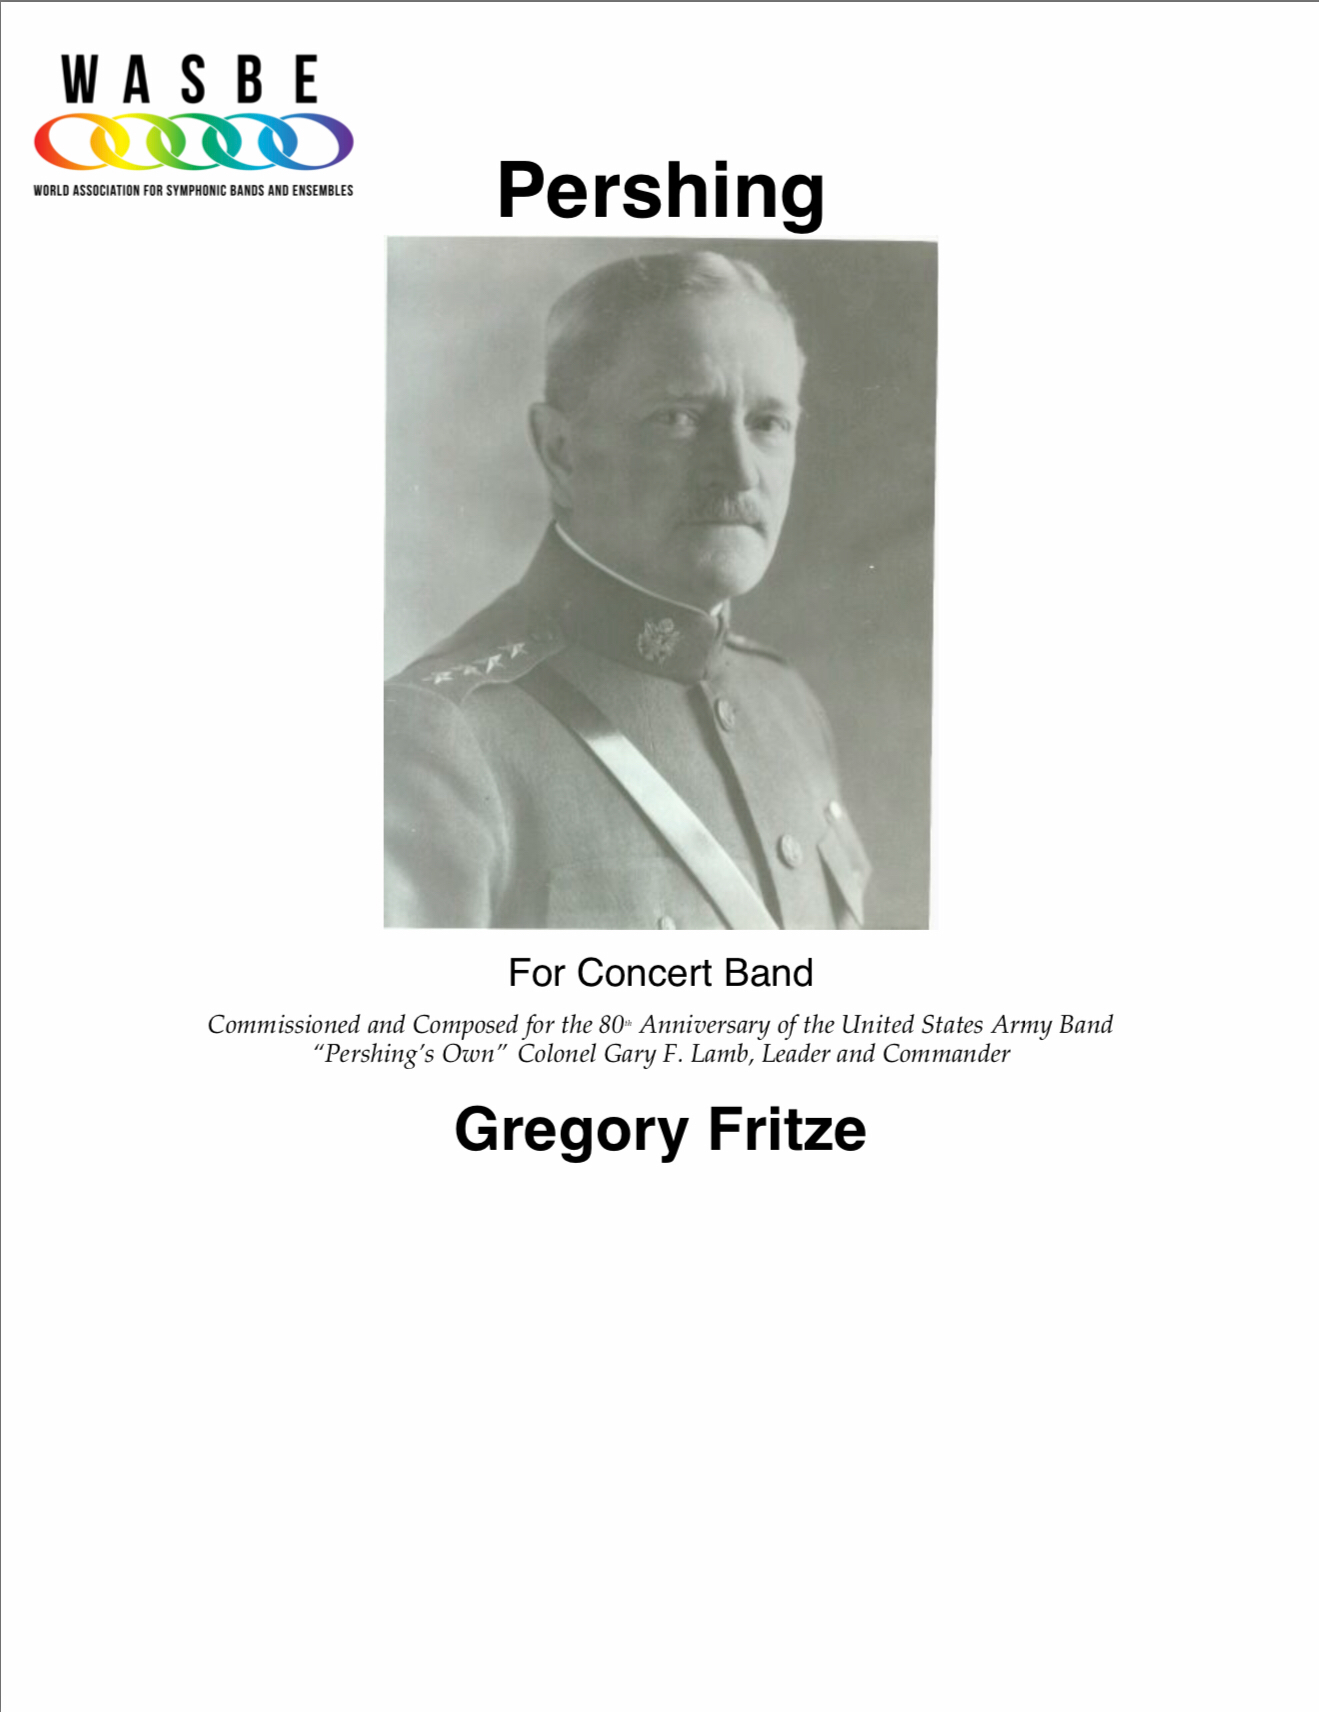 Pershing by Greg Fritze